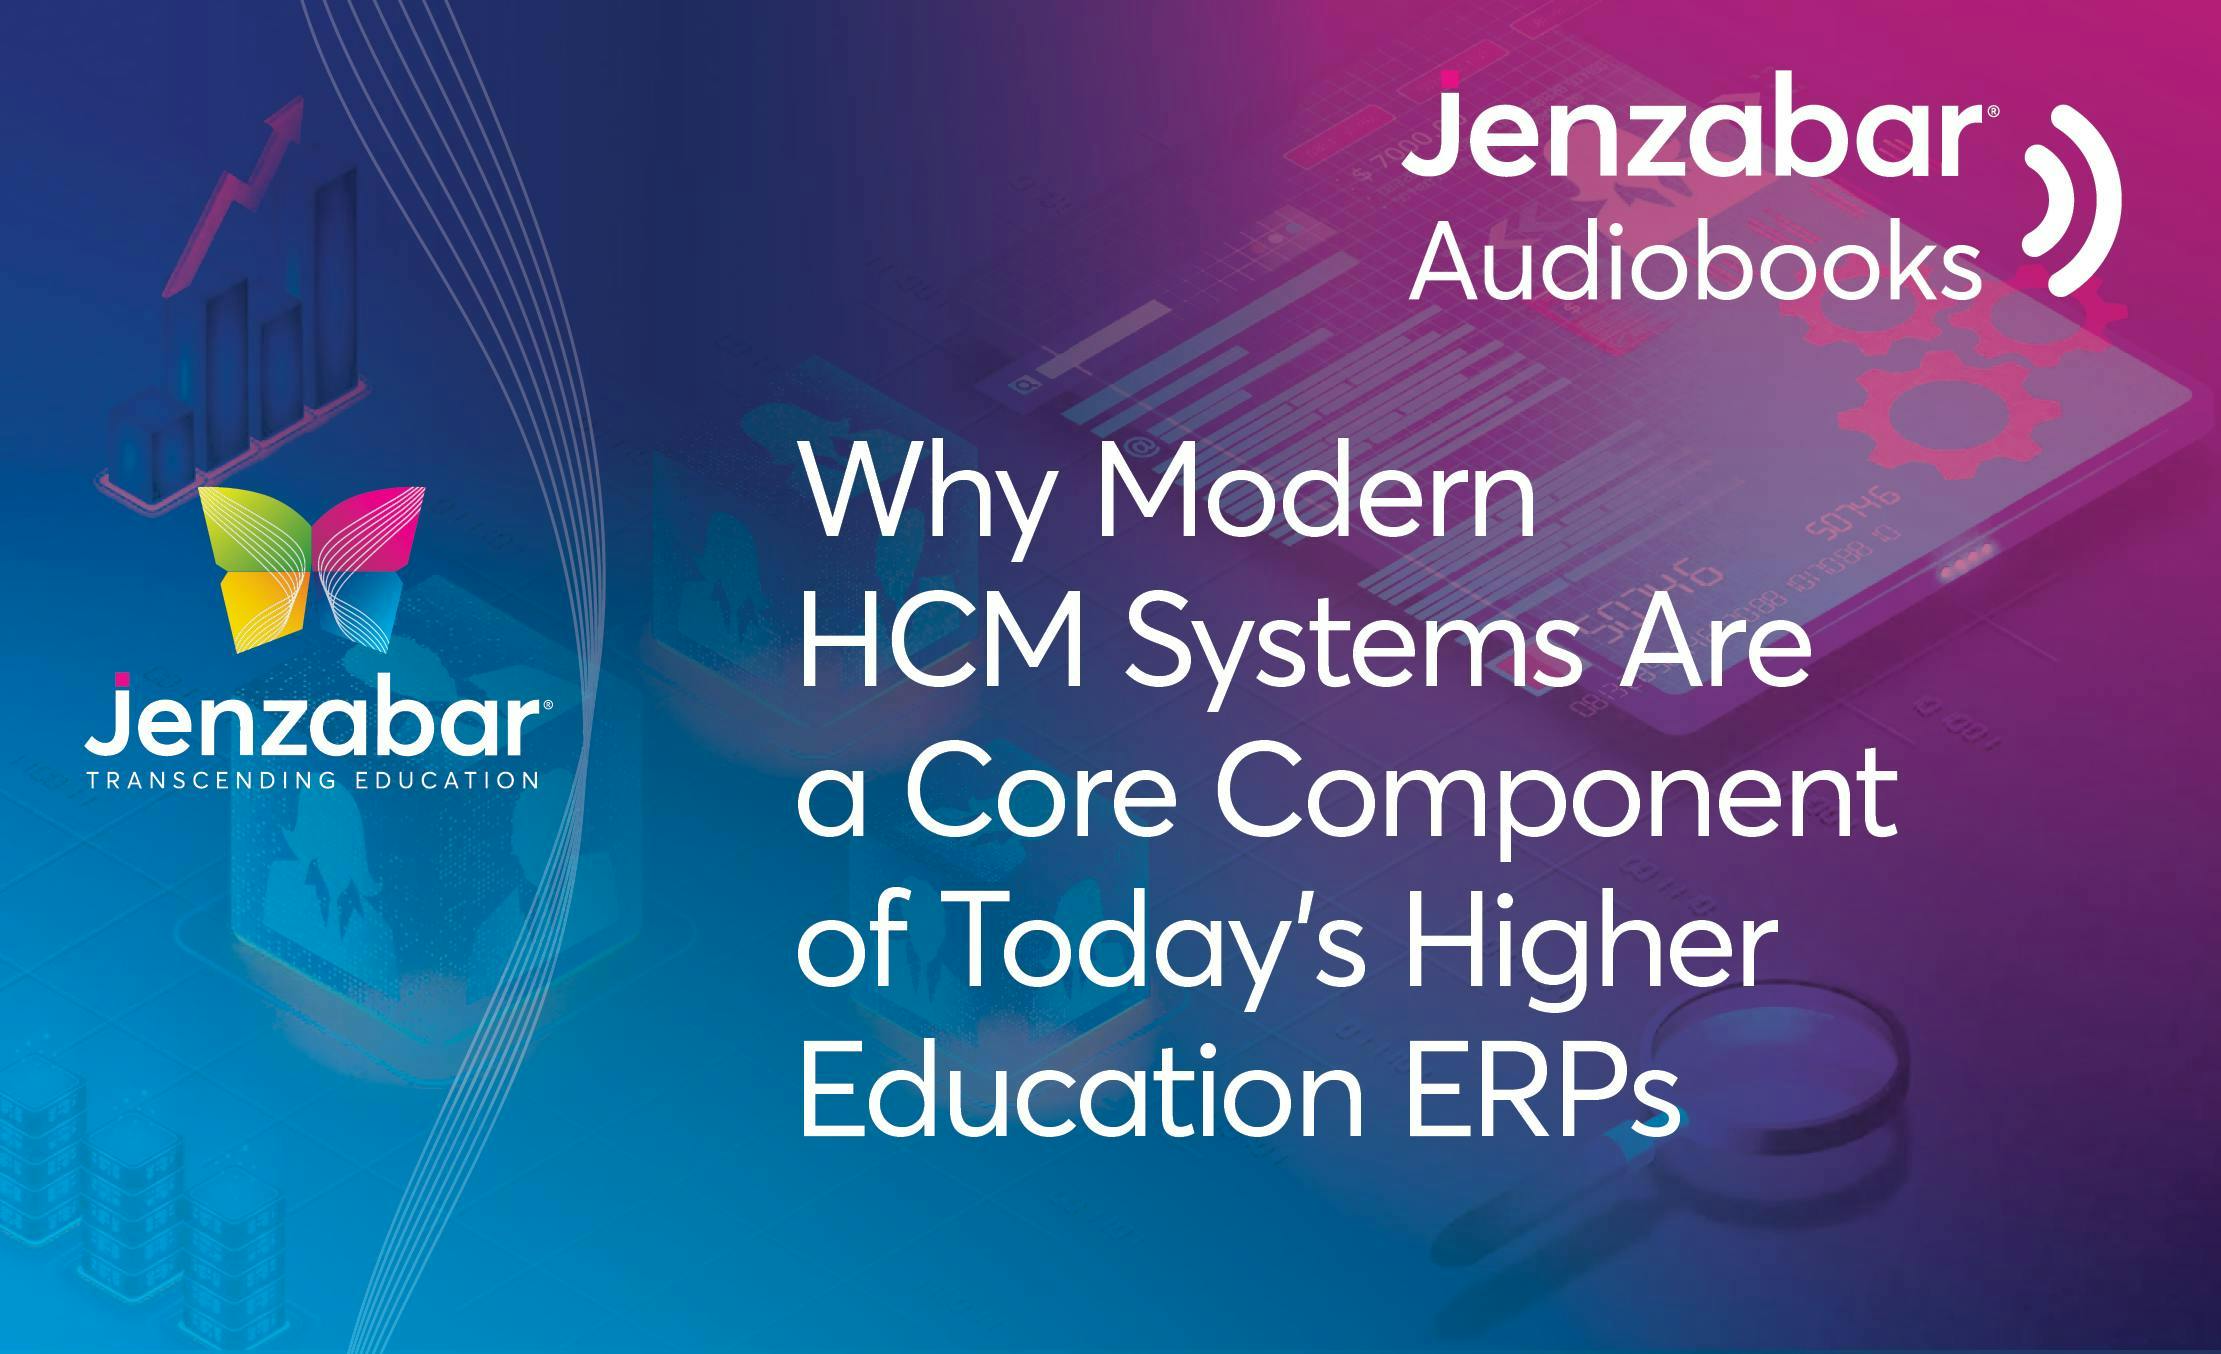 Audiobook: Why Modern HCM Systems Are a Core Component of Today's Higher Education ERPs